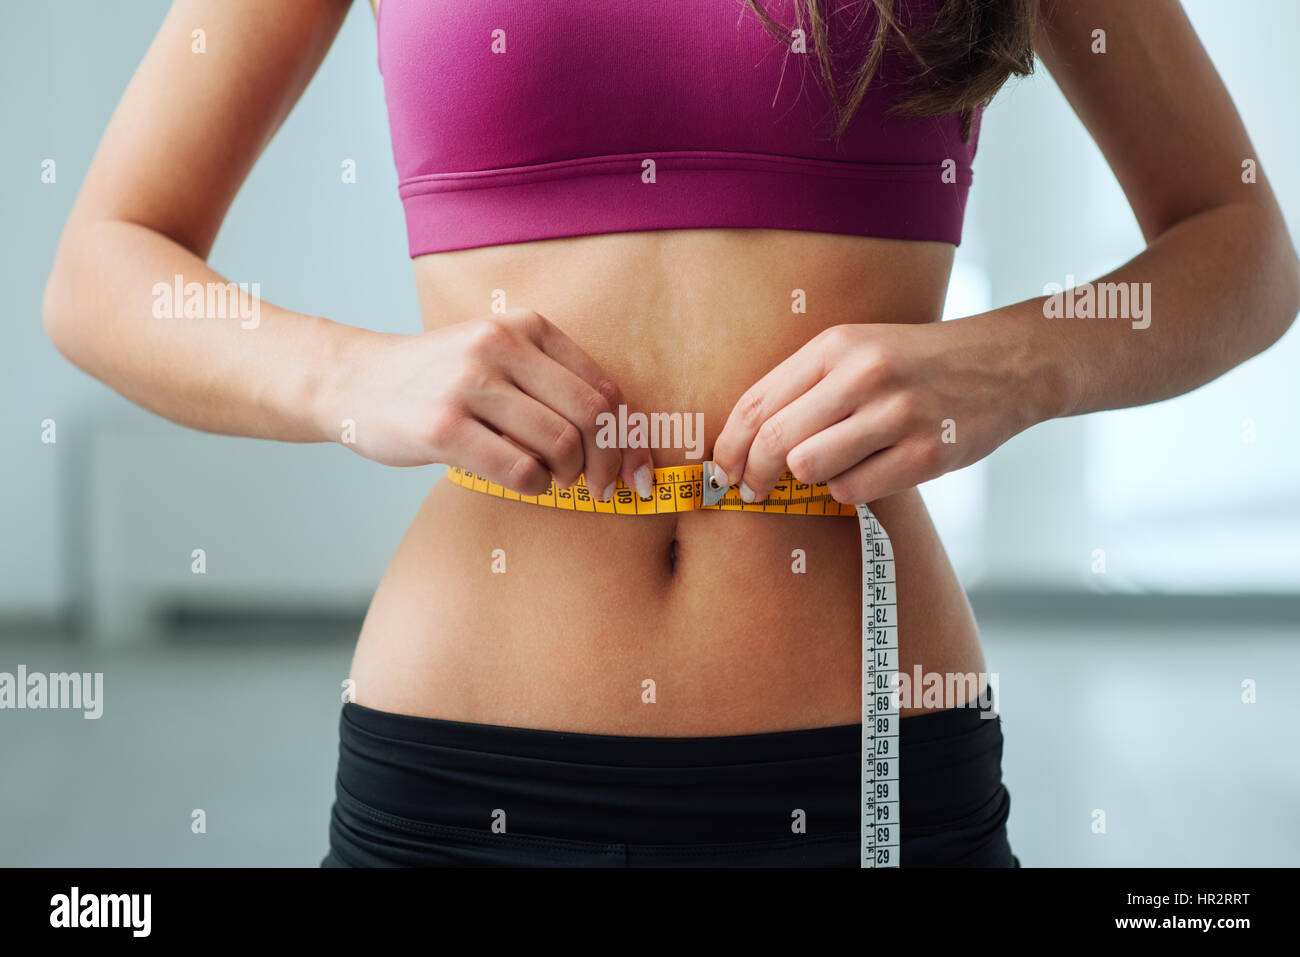 Woman measuring waist with tape in gym · Free Stock Photo